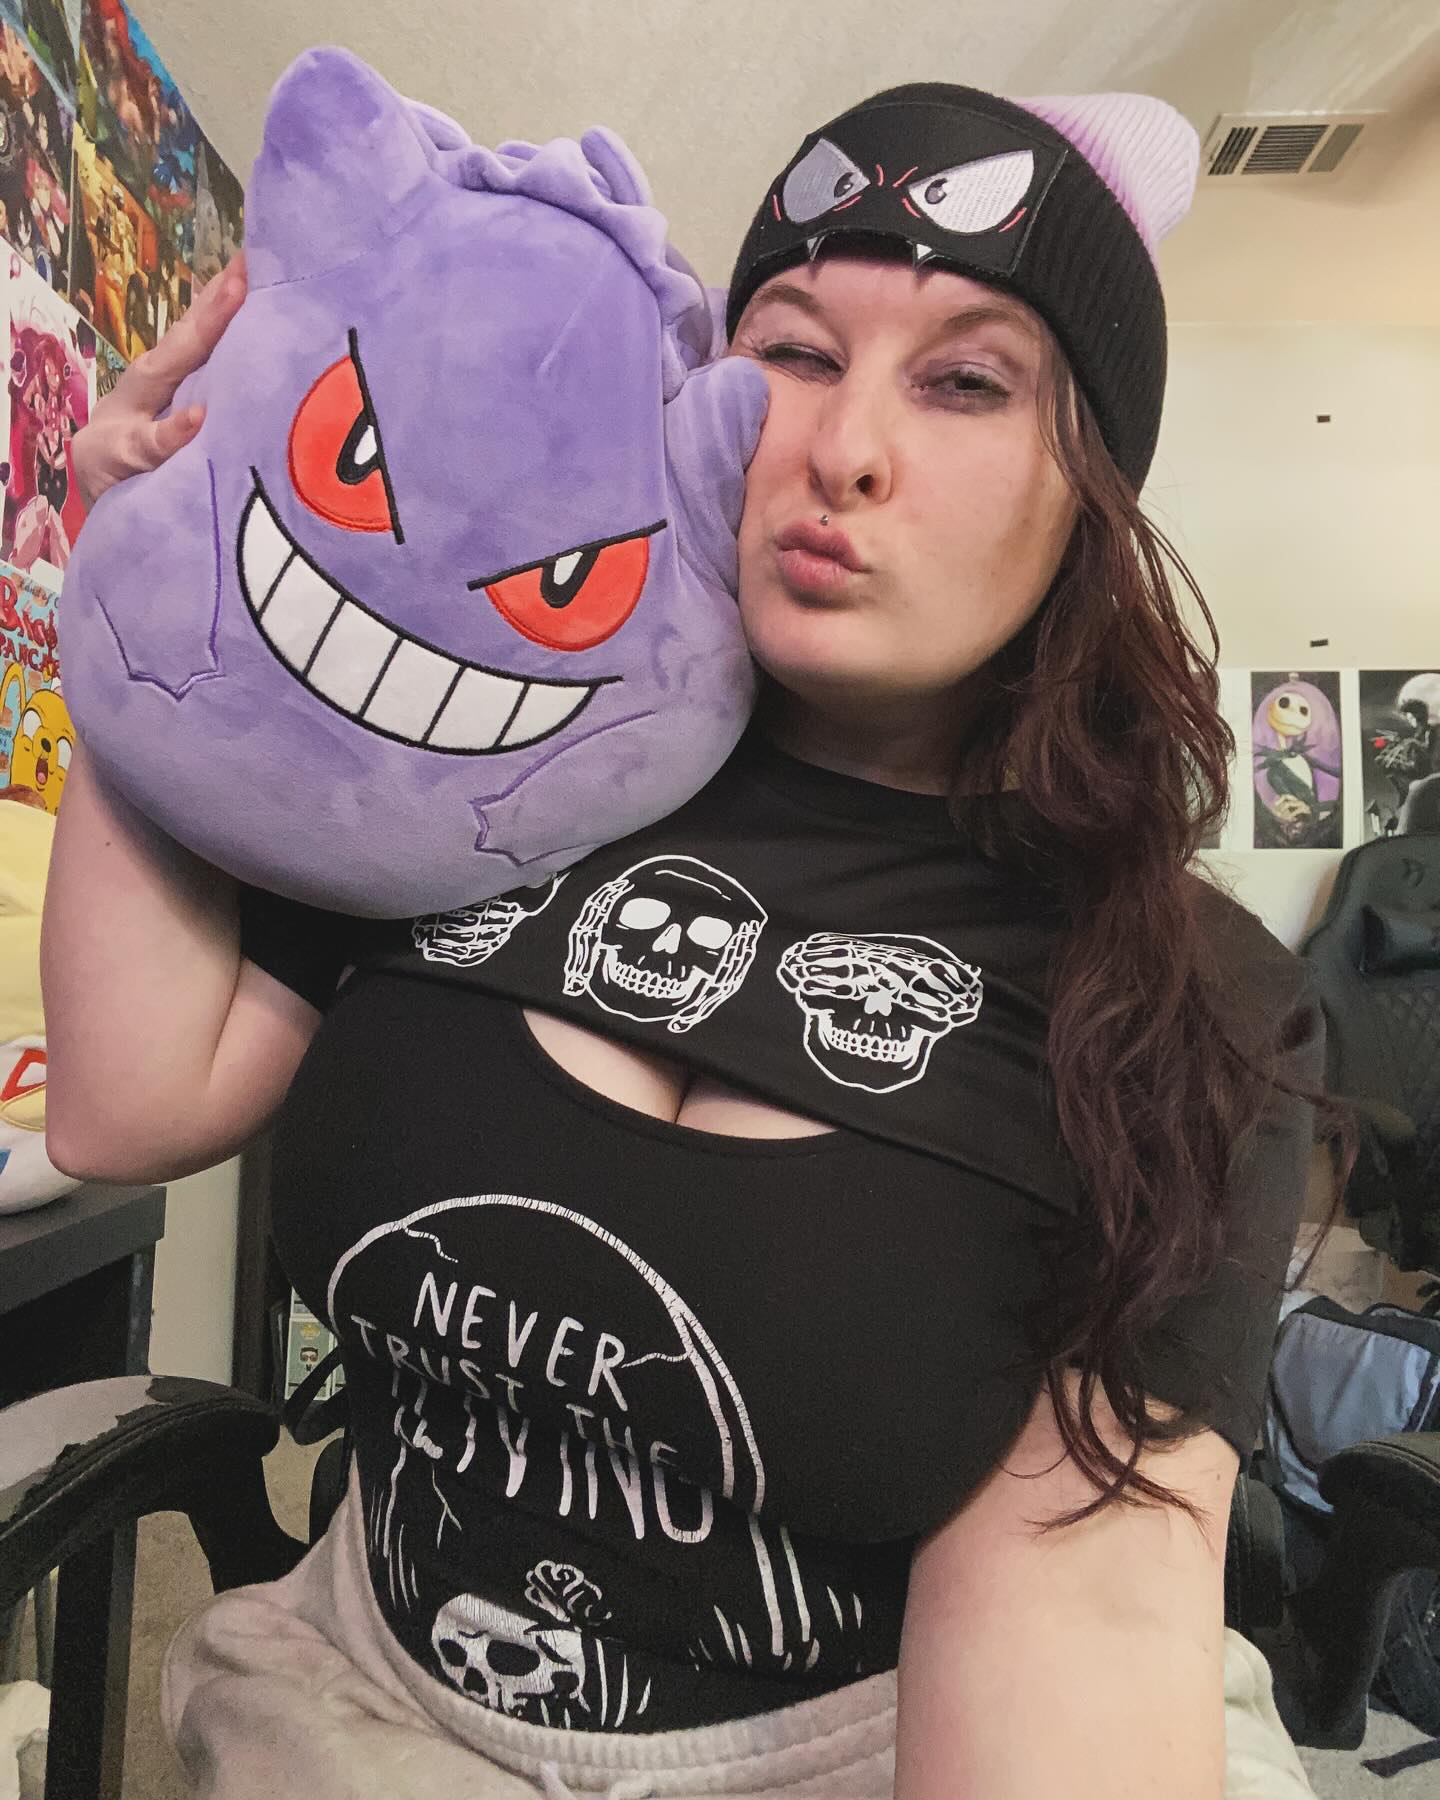 I’ve always been a ghost type girlie when it comes to Pokémon. My top three favorite types in the game are 1) Grass, 2) Poison, and 3) Ghost. Lucky for me they overlap quite often haha
Comment your favorite Pokémon type below! ⬇️ 
.
.
#pokemon #pokemonart #pokémon #pokemoncommunity #pokemonlove #pokemonlover #pokemonplush #gengar #gengarpokemon #ghosttrio #ghosttype #ghosttypepokemon